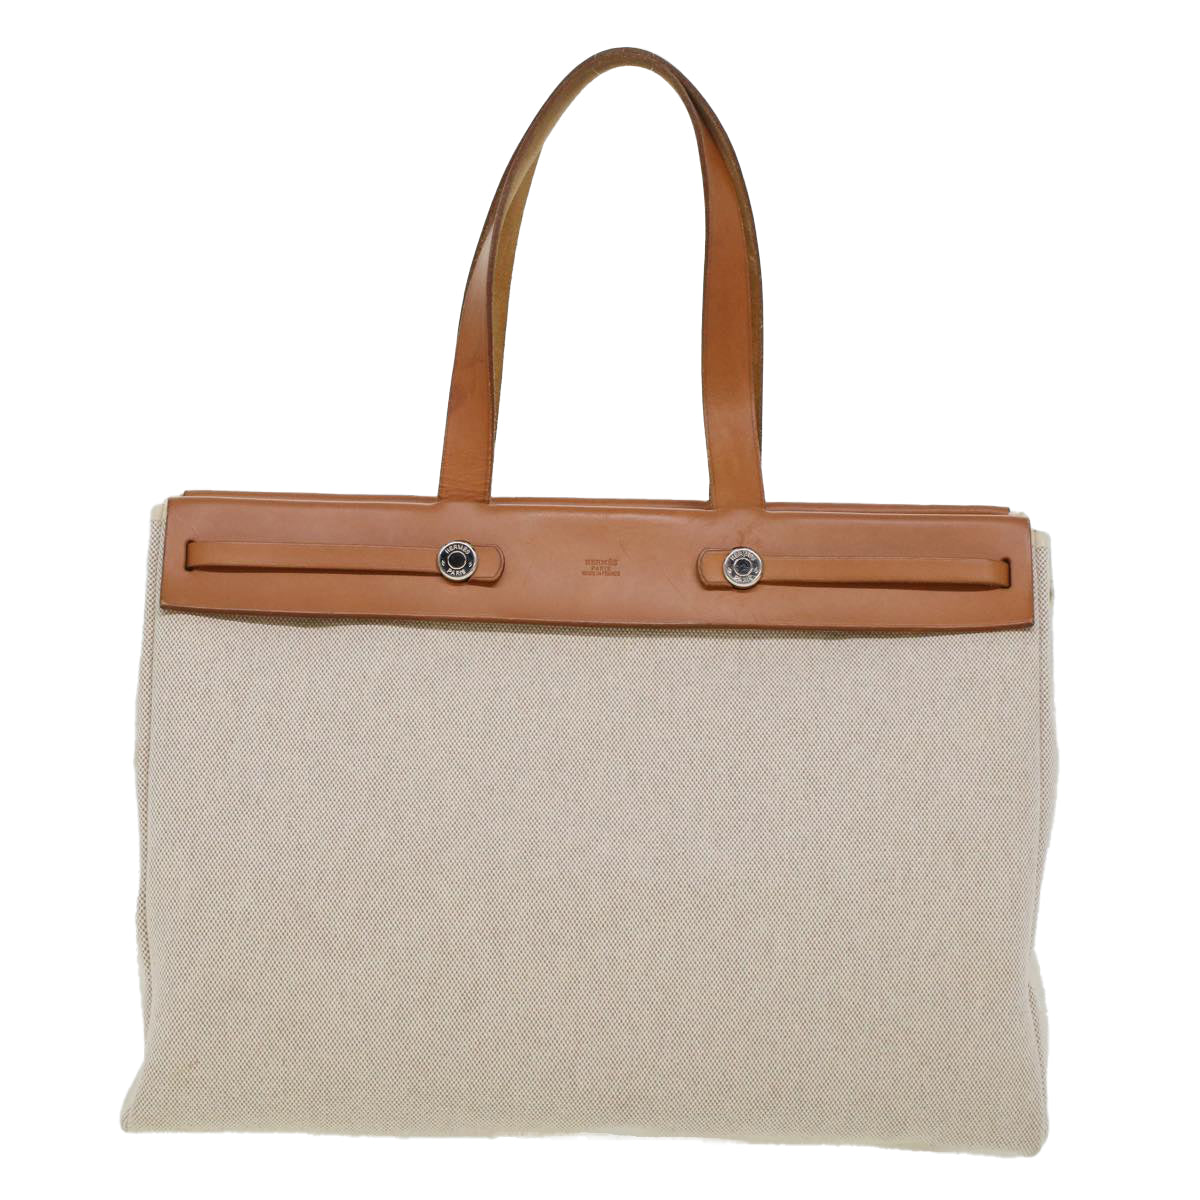 HERMES Her Bag Cabus GM Tote Bag Canvas Leather Beige Auth fm2384 - 0